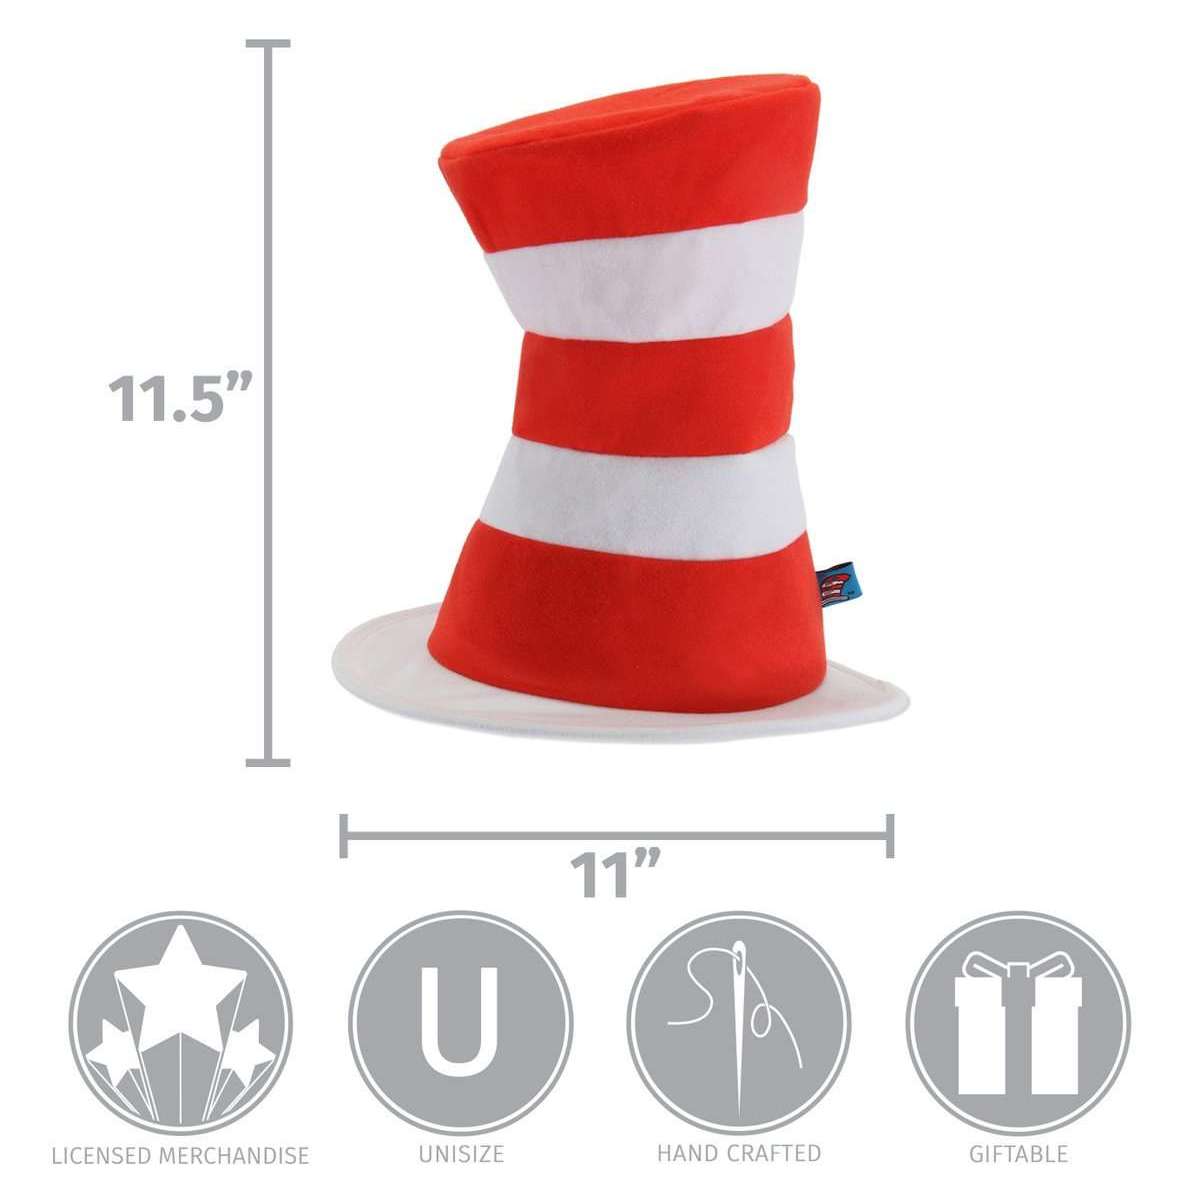 Dr. Seuss Cat In The Hat Red & White Striped Hat